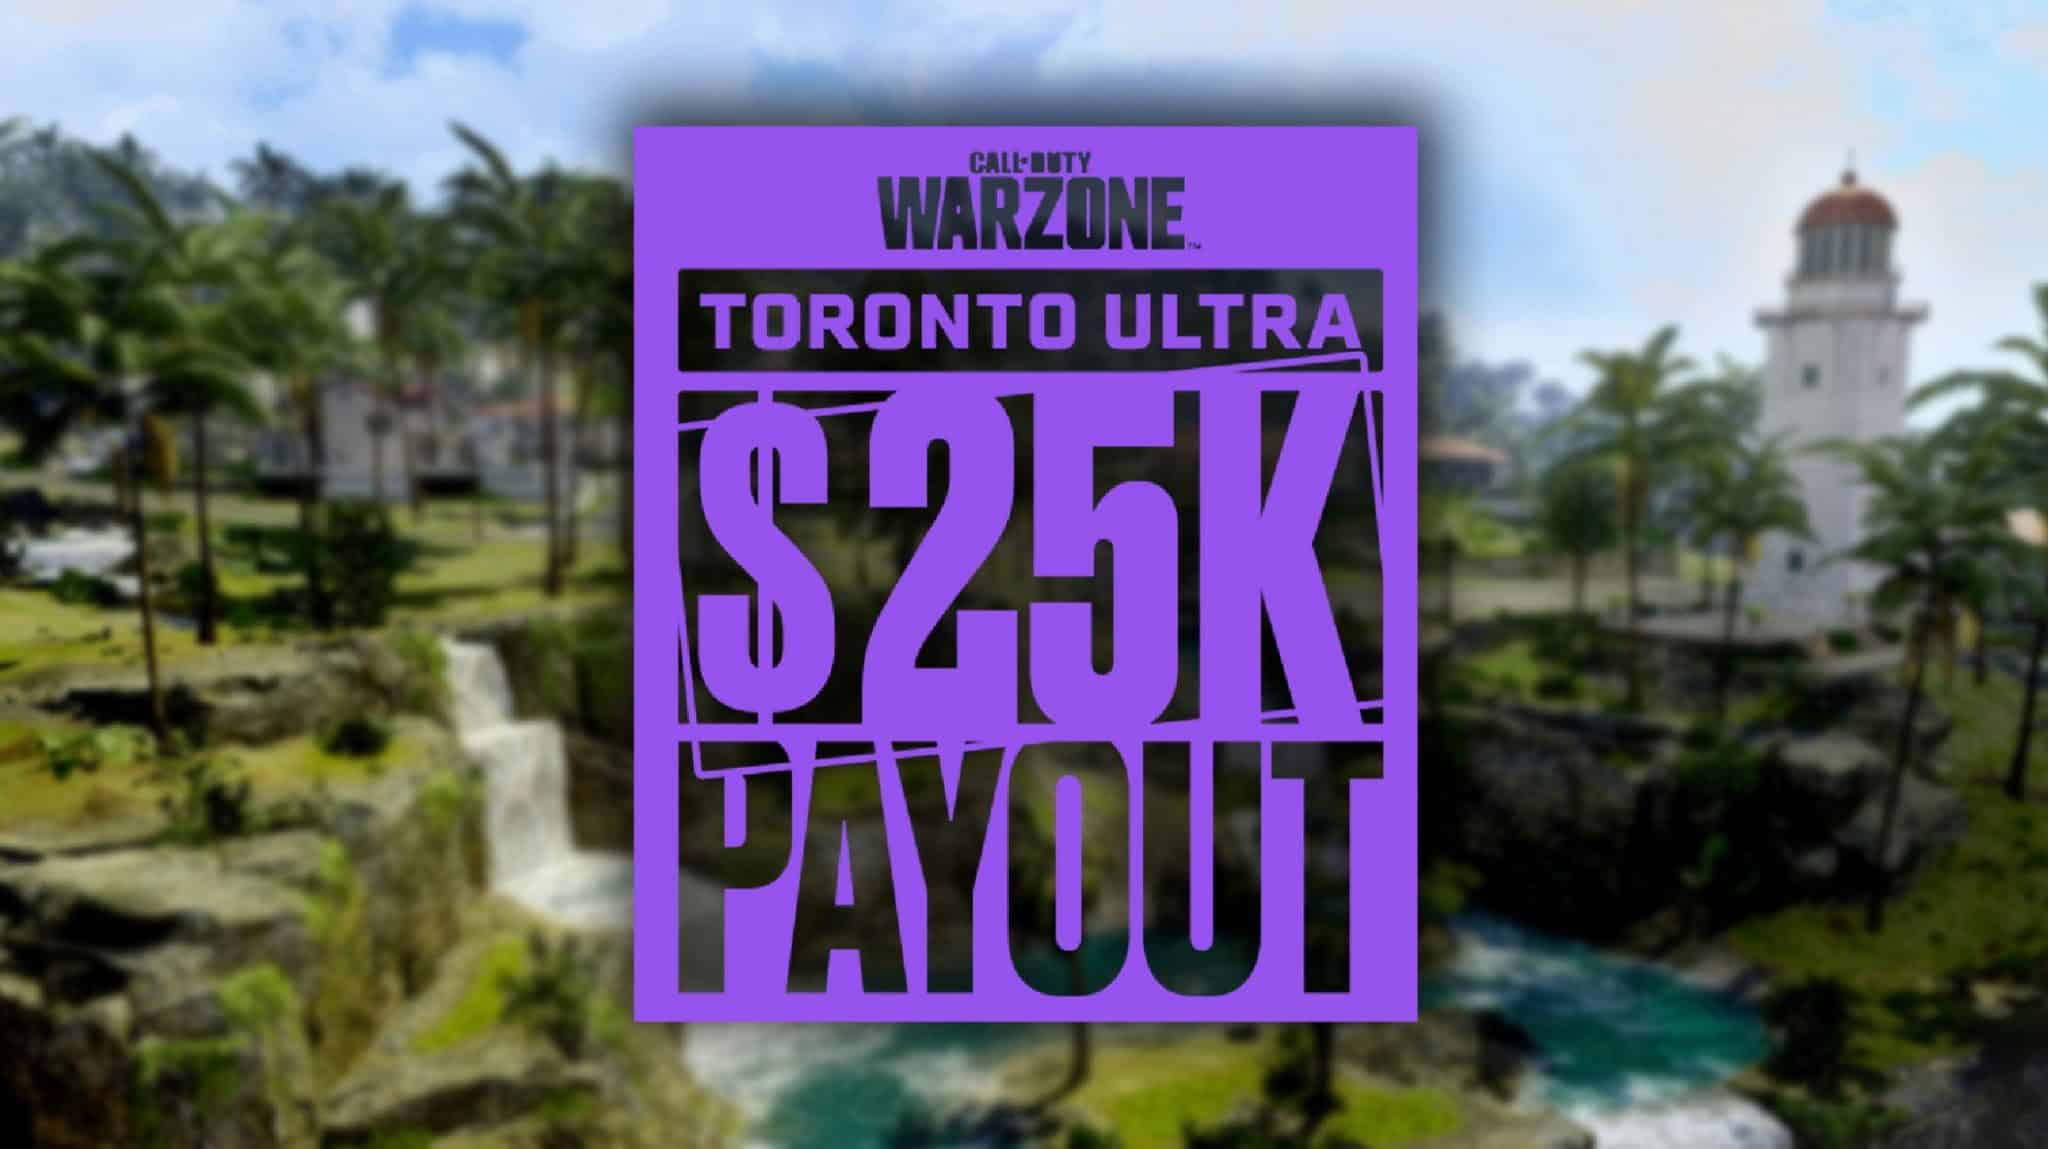 Toronto Ultra $25K Warzone Payout event graphics